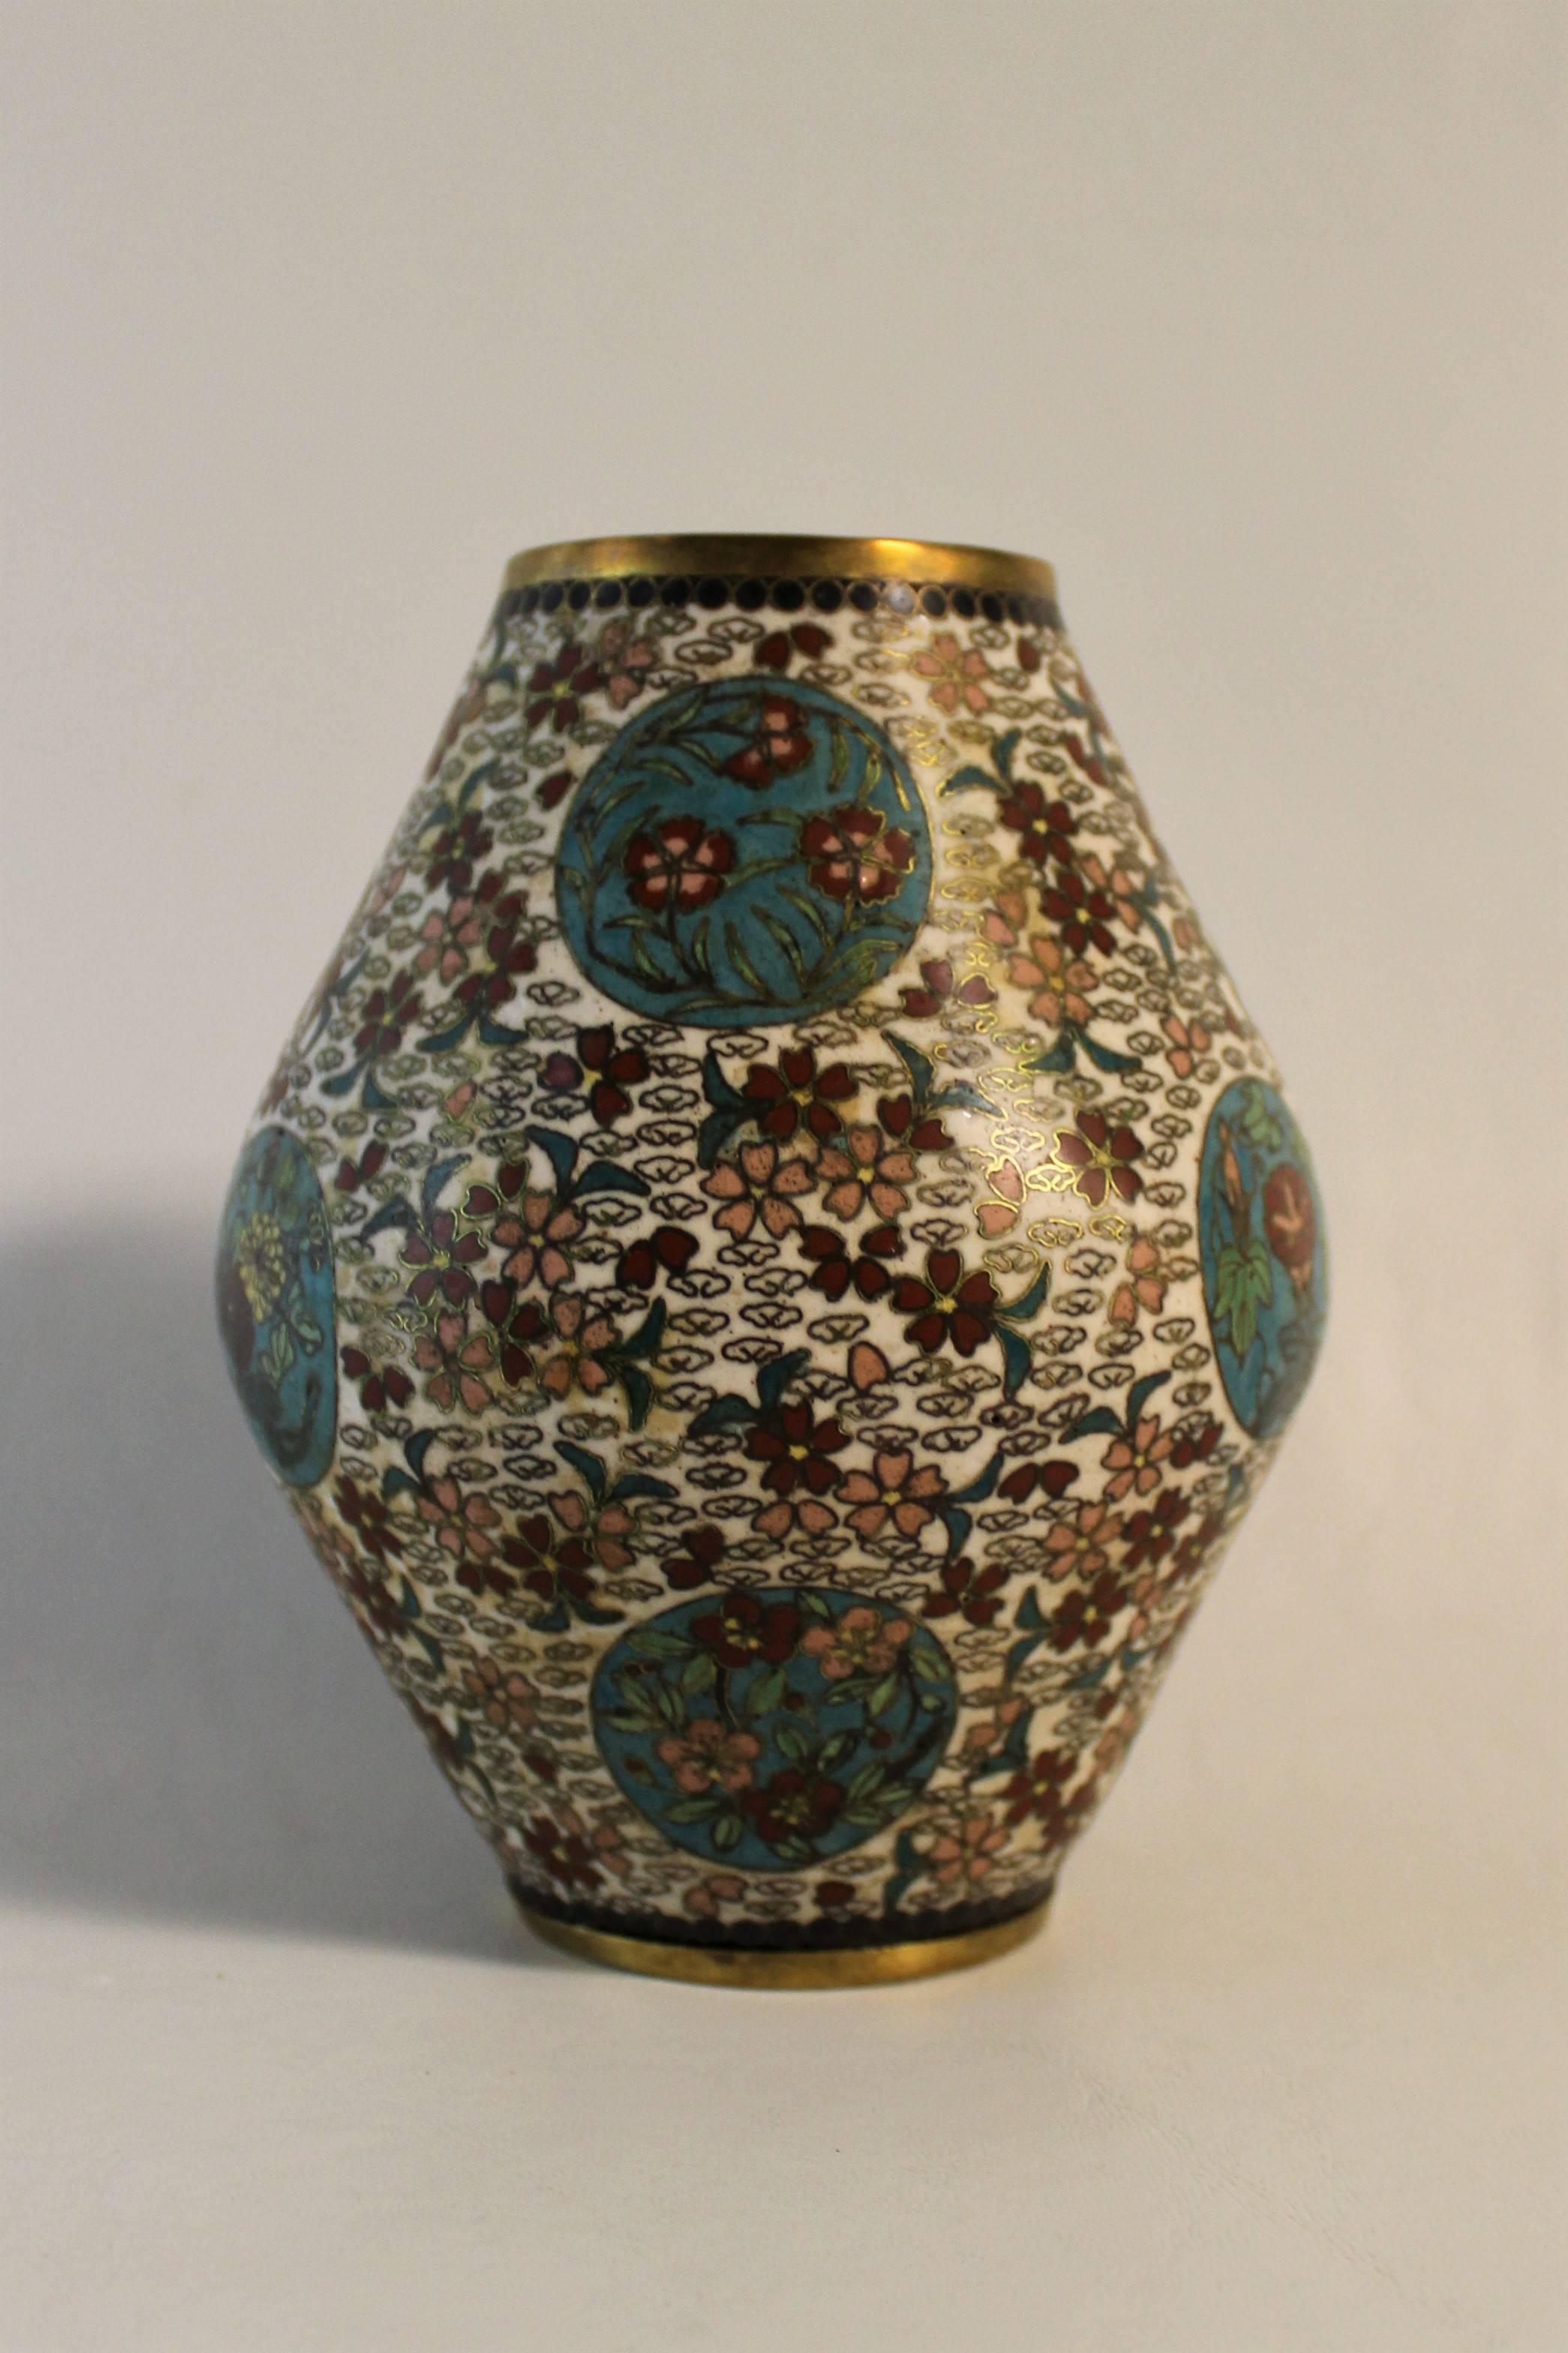 Japanese cloisonne vase dating to the Meiji period. It is beautifully decorated with turquoise roundels filled with flowers on a white ground accented with a floral design.